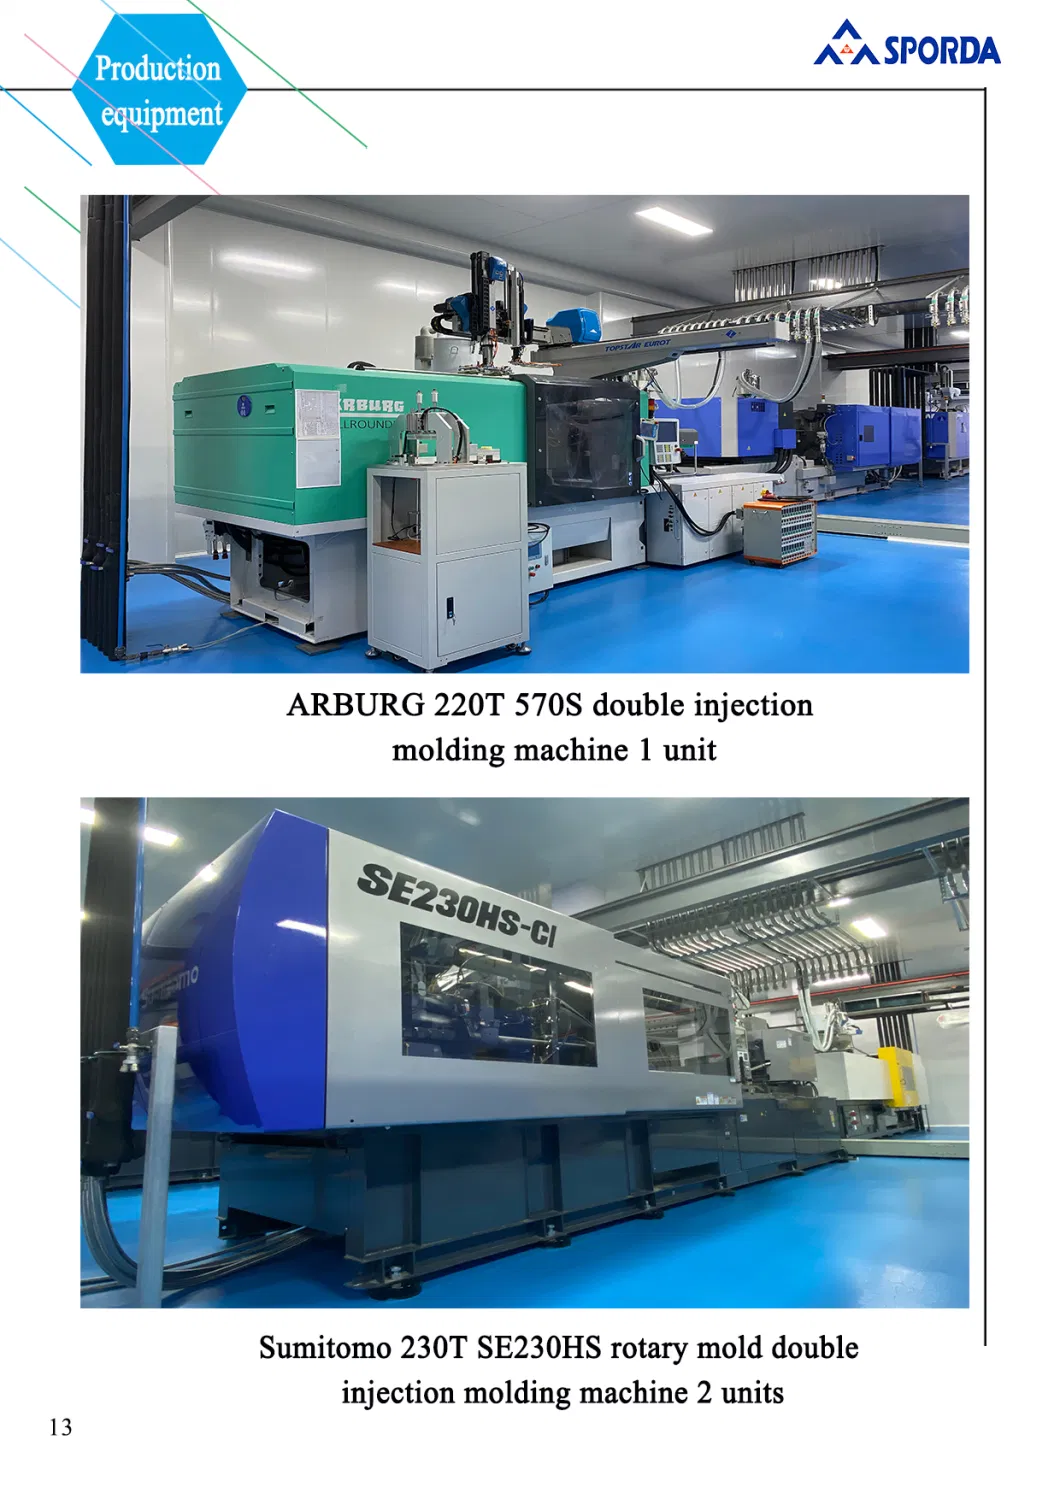 600000-1200000 Shoots ISO Approved OEM Plastic Film+Wooden Case Rapid Creation Aerospace-Grade Injection Mold